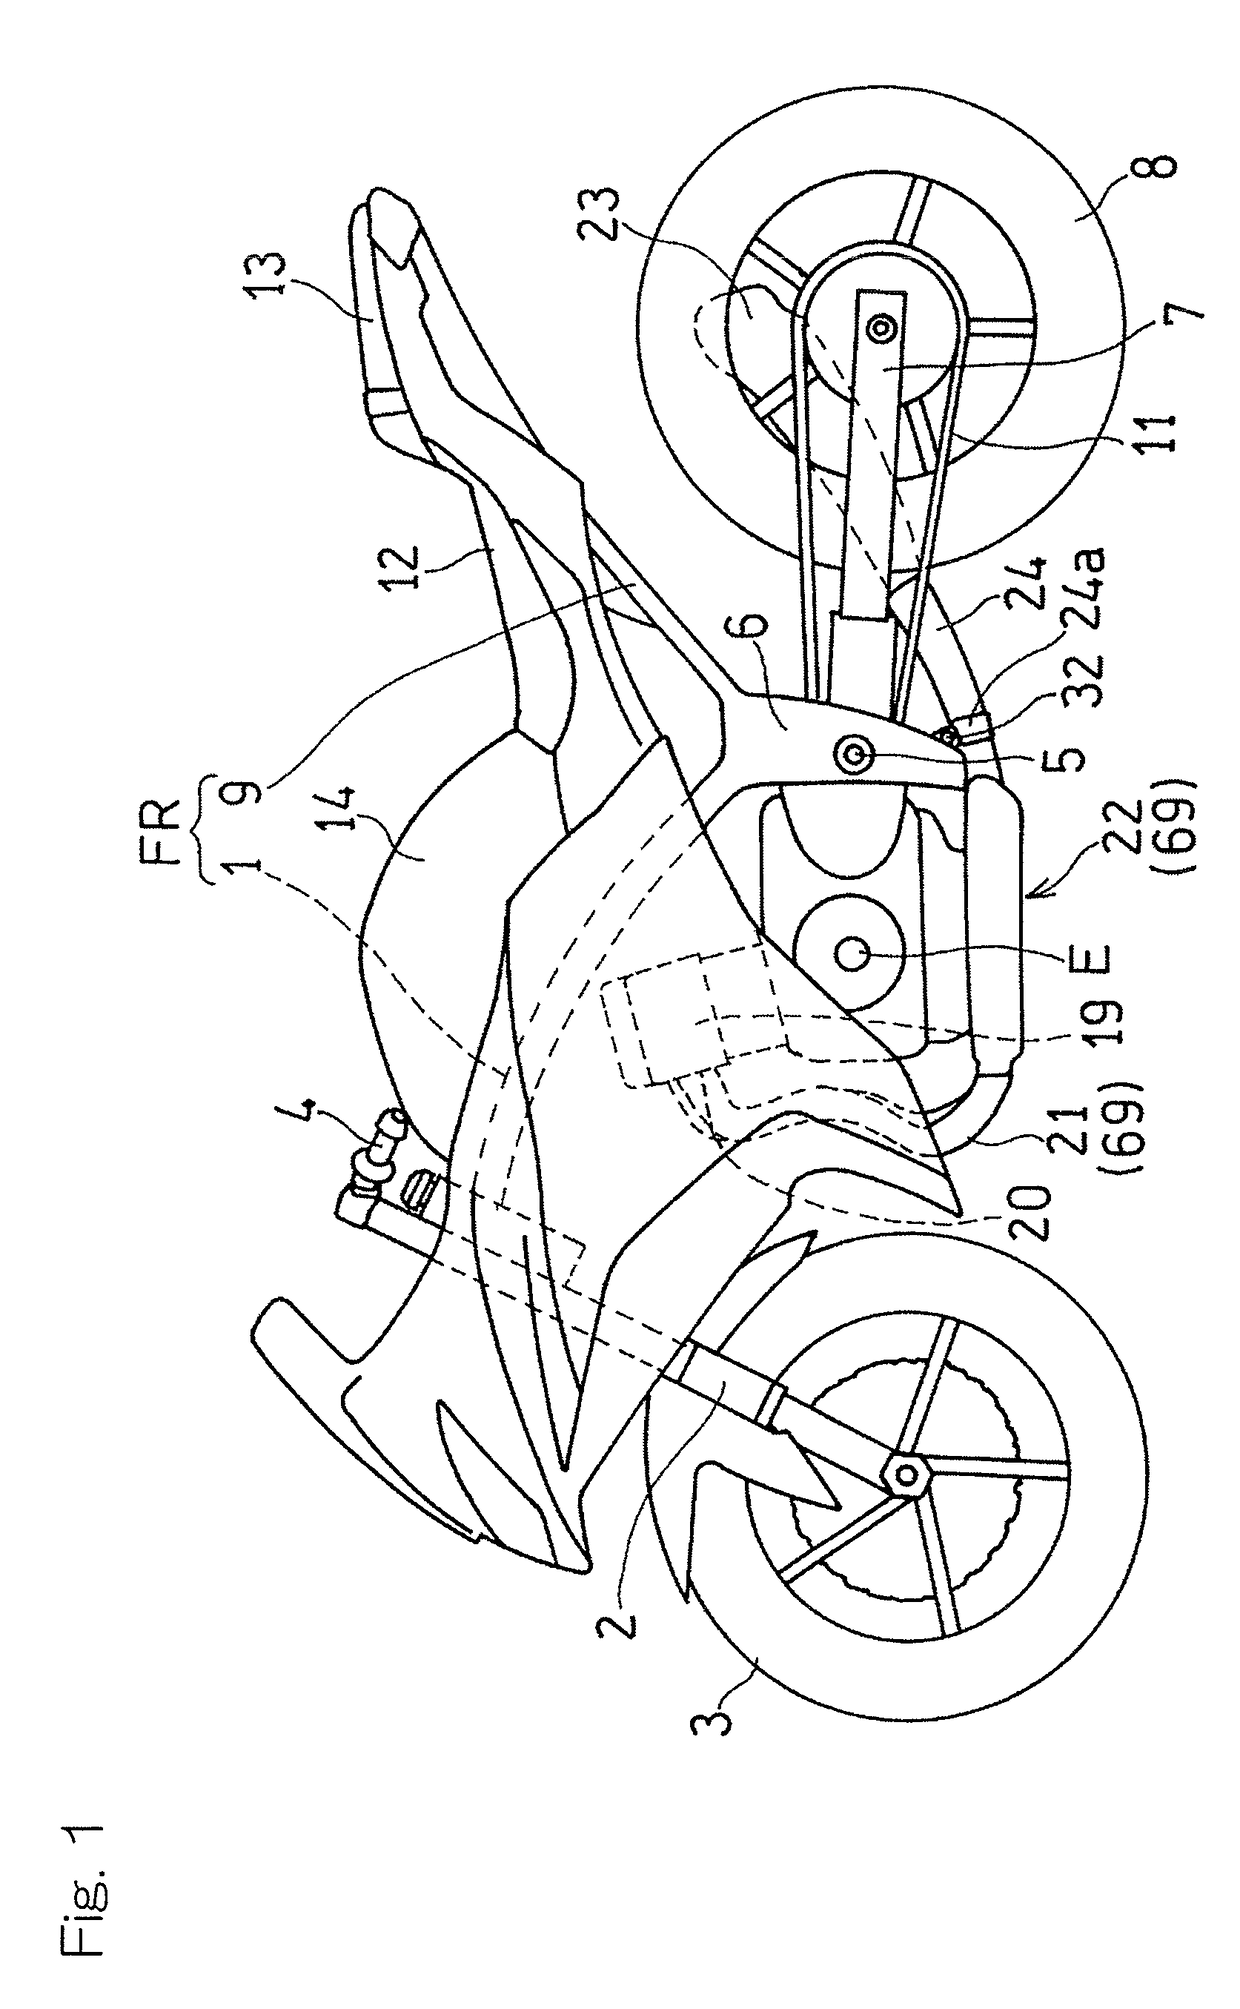 Exhaust device for combustion engine